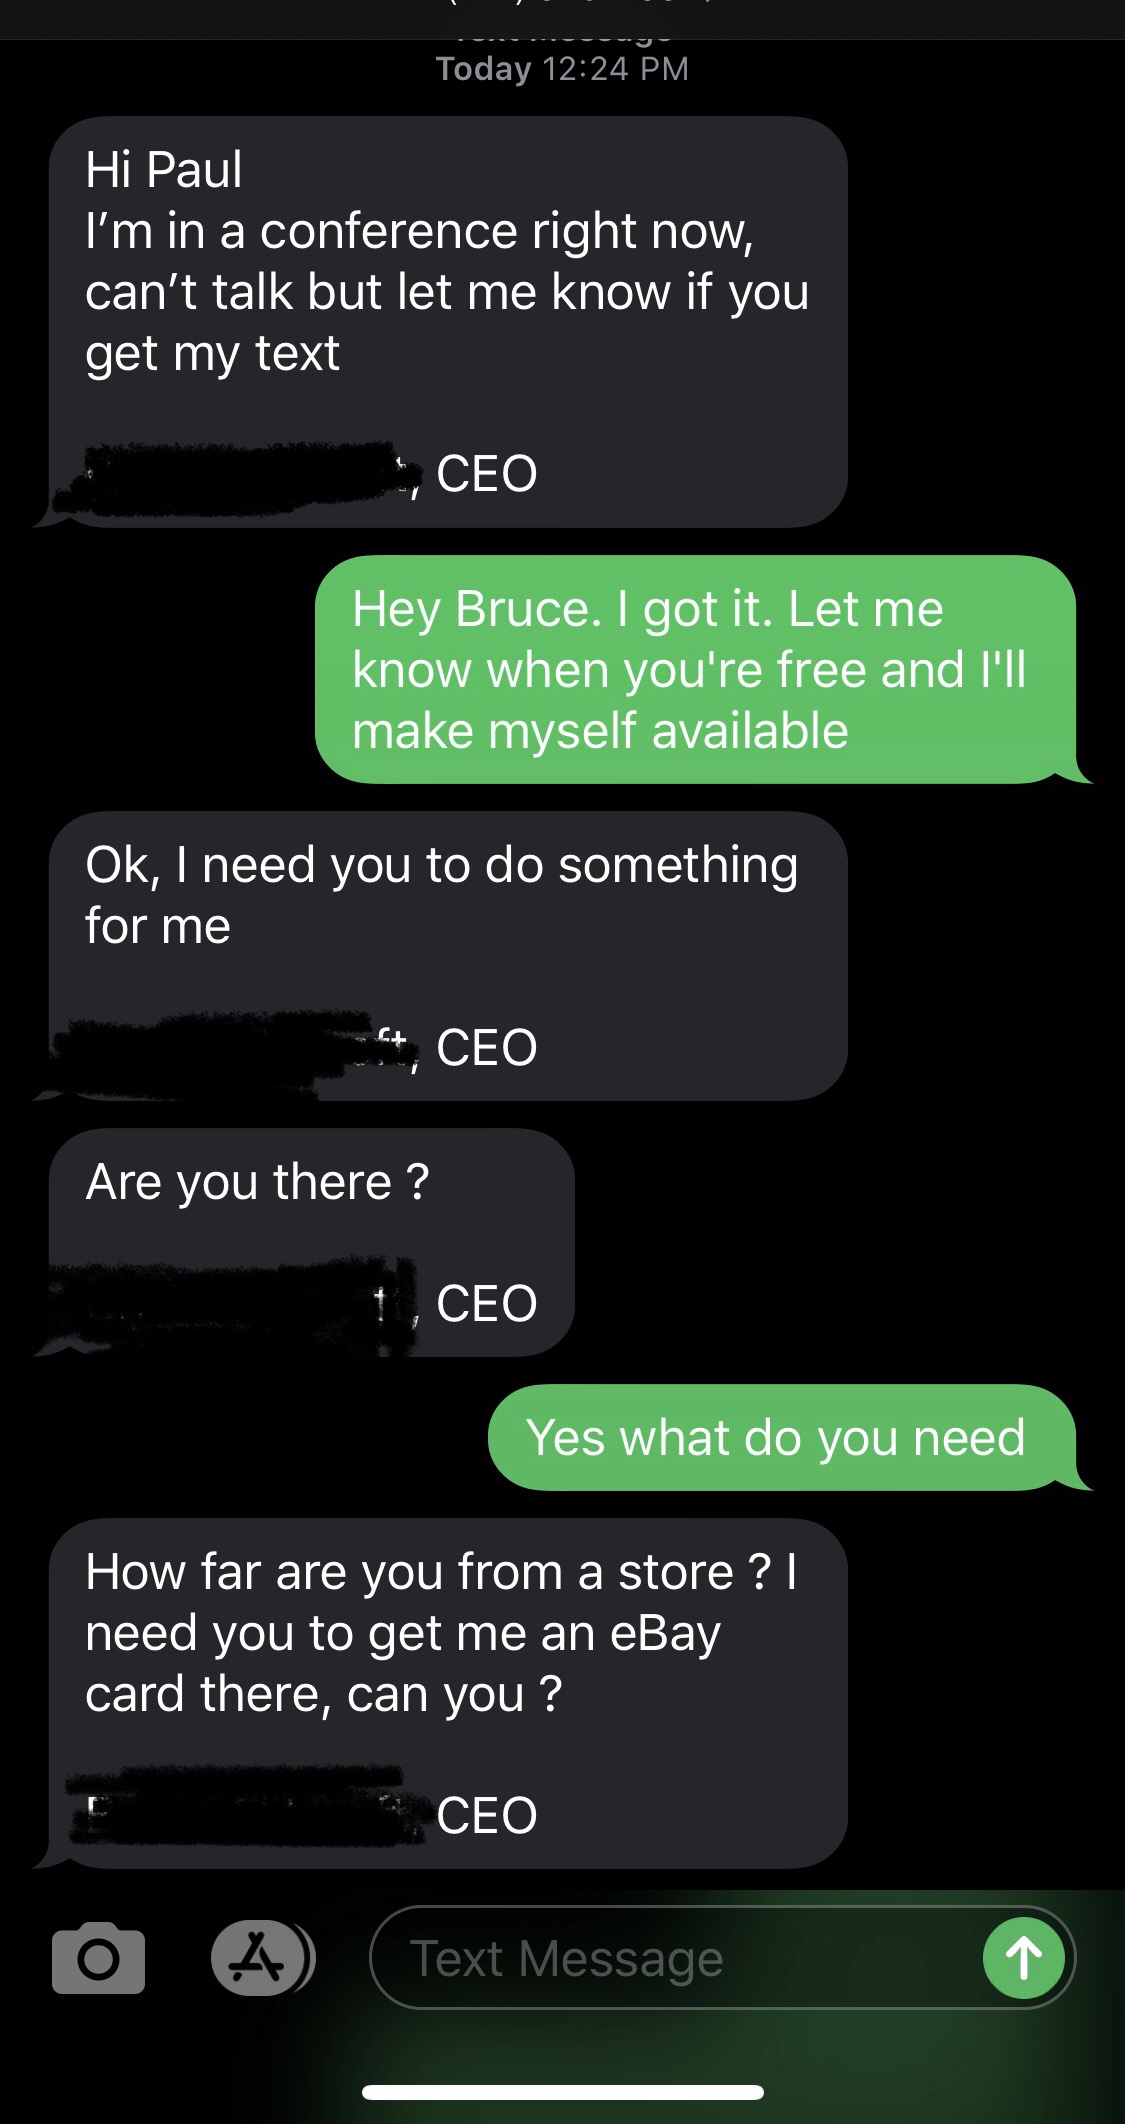 screenshot - Today Hi Paul I'm in a conference right now, can't talk but let me know if you get my text , Ceo Hey Bruce. I got it. Let me know when you're free and I'll make myself available Ok, I need you to do something for me 44, Ceo Are you there? 1 ,